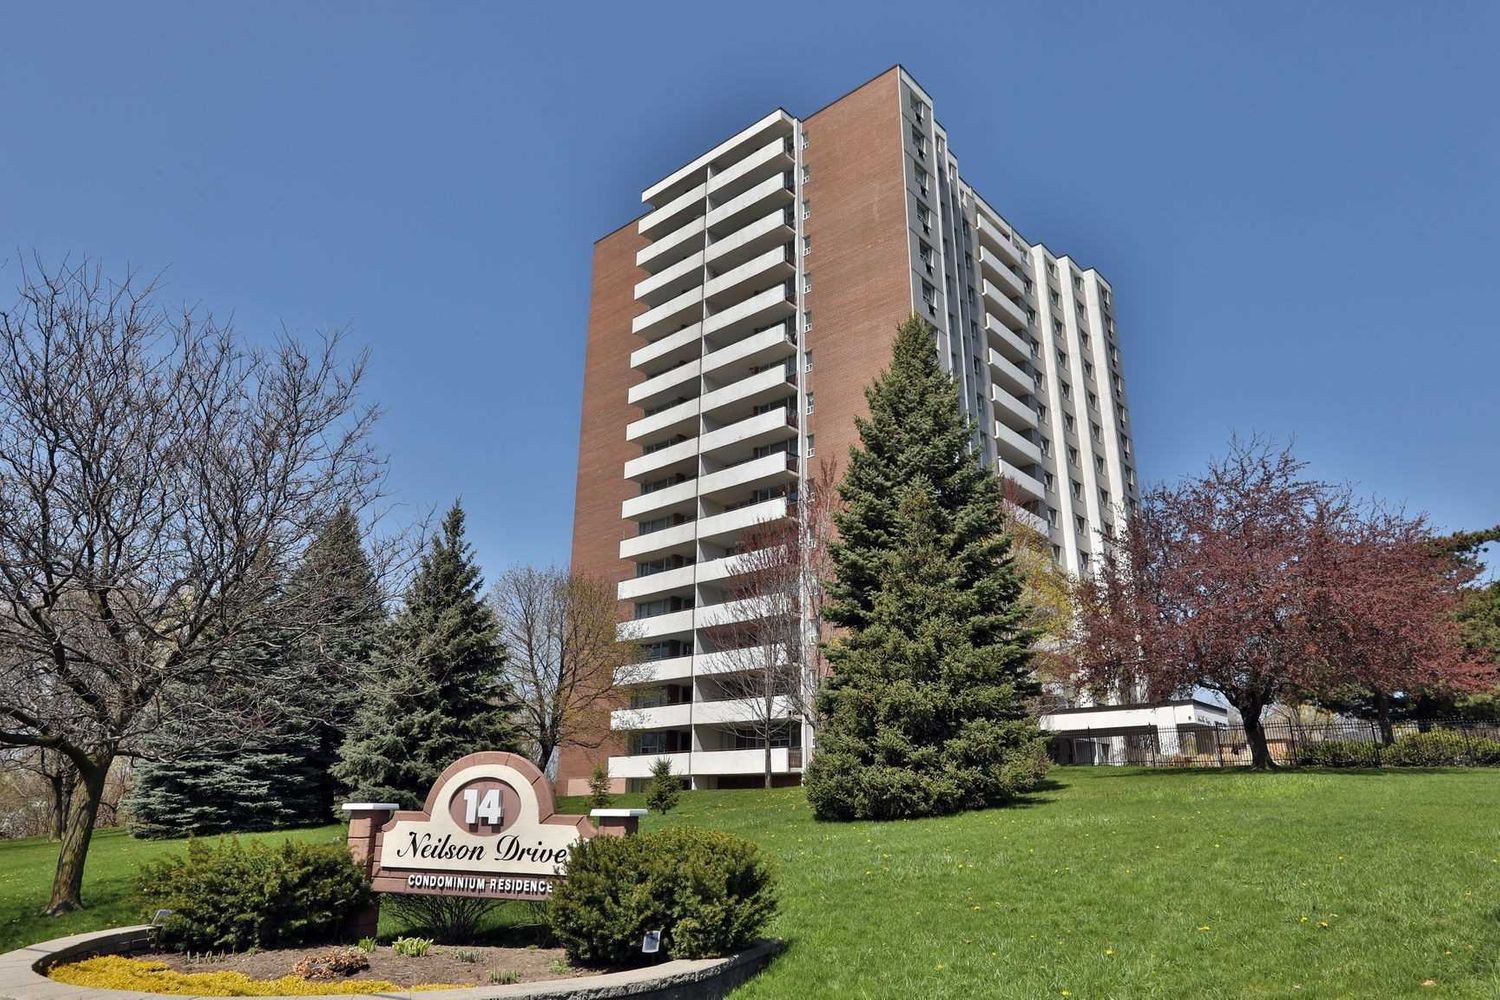 14 Neilson Drive. Round Hill Condos is located in  Etobicoke, Toronto - image #1 of 2